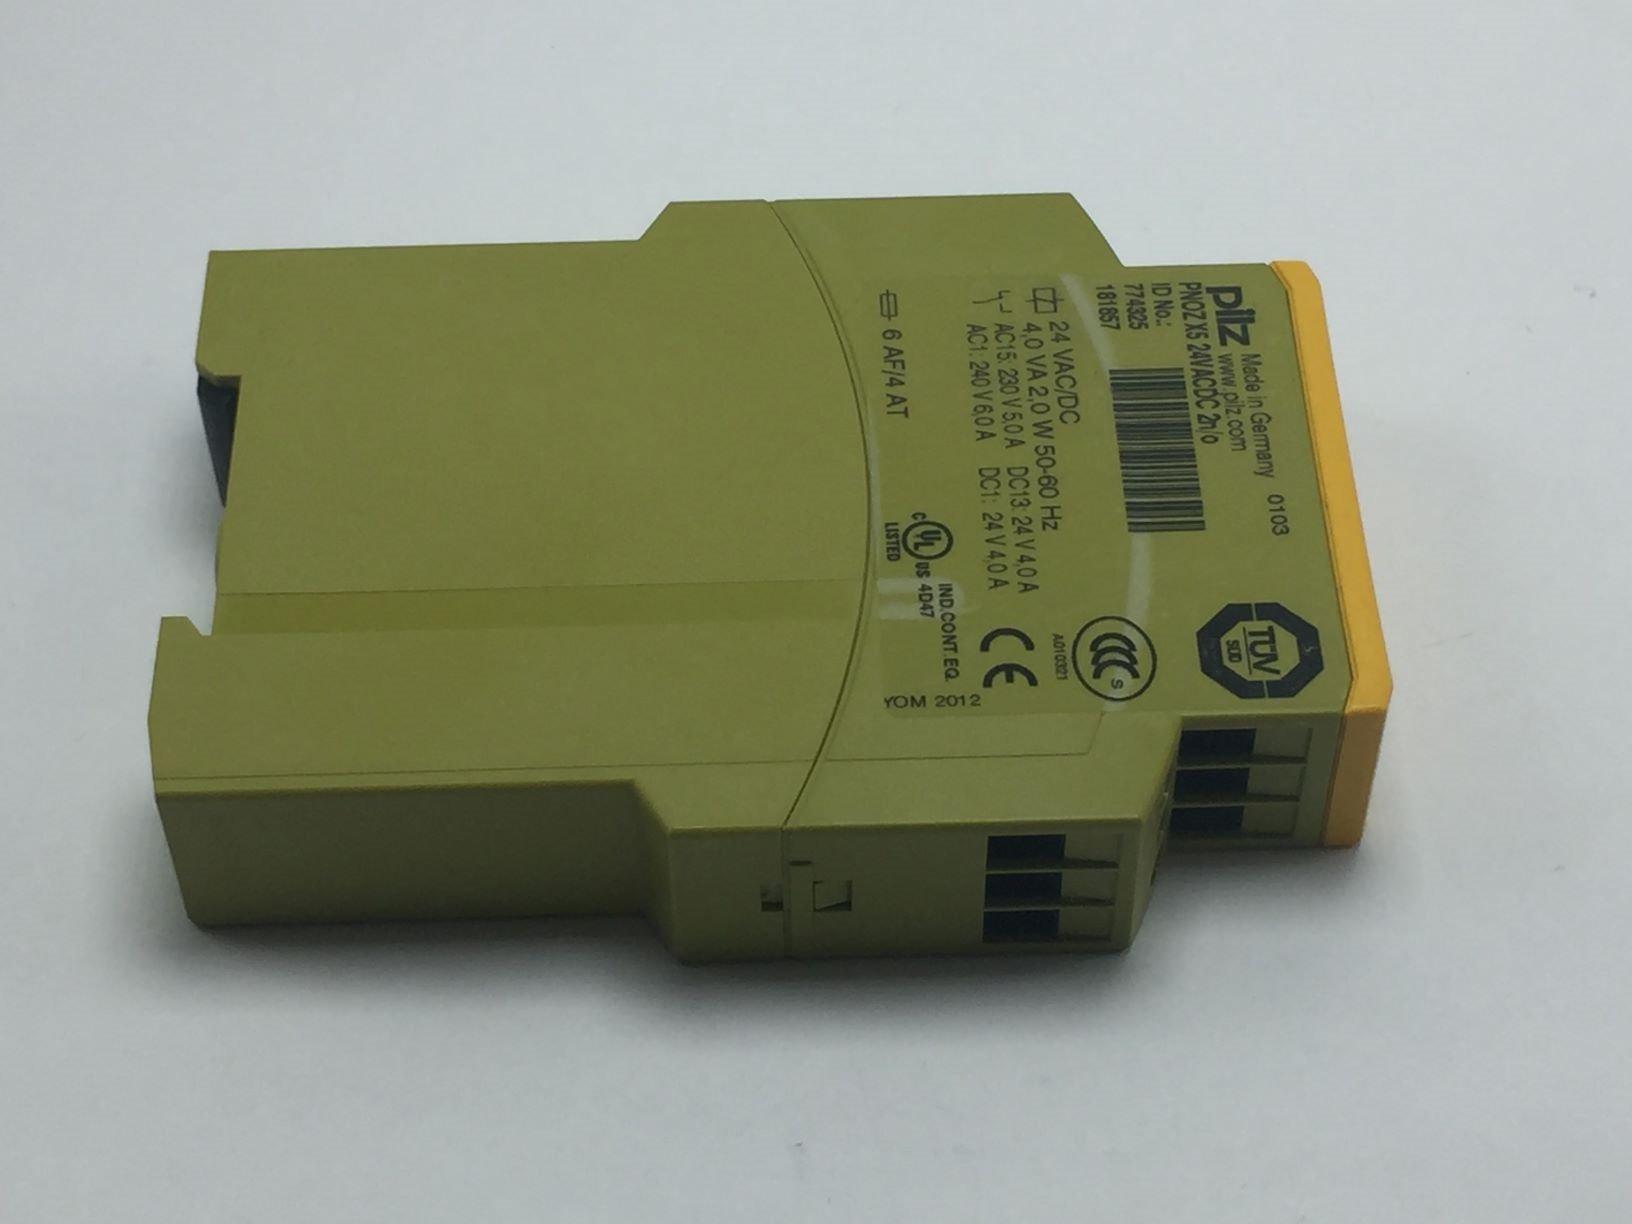  Pilz 774325 PNOZ-X5-24 SAFETY RELAY TESTED 